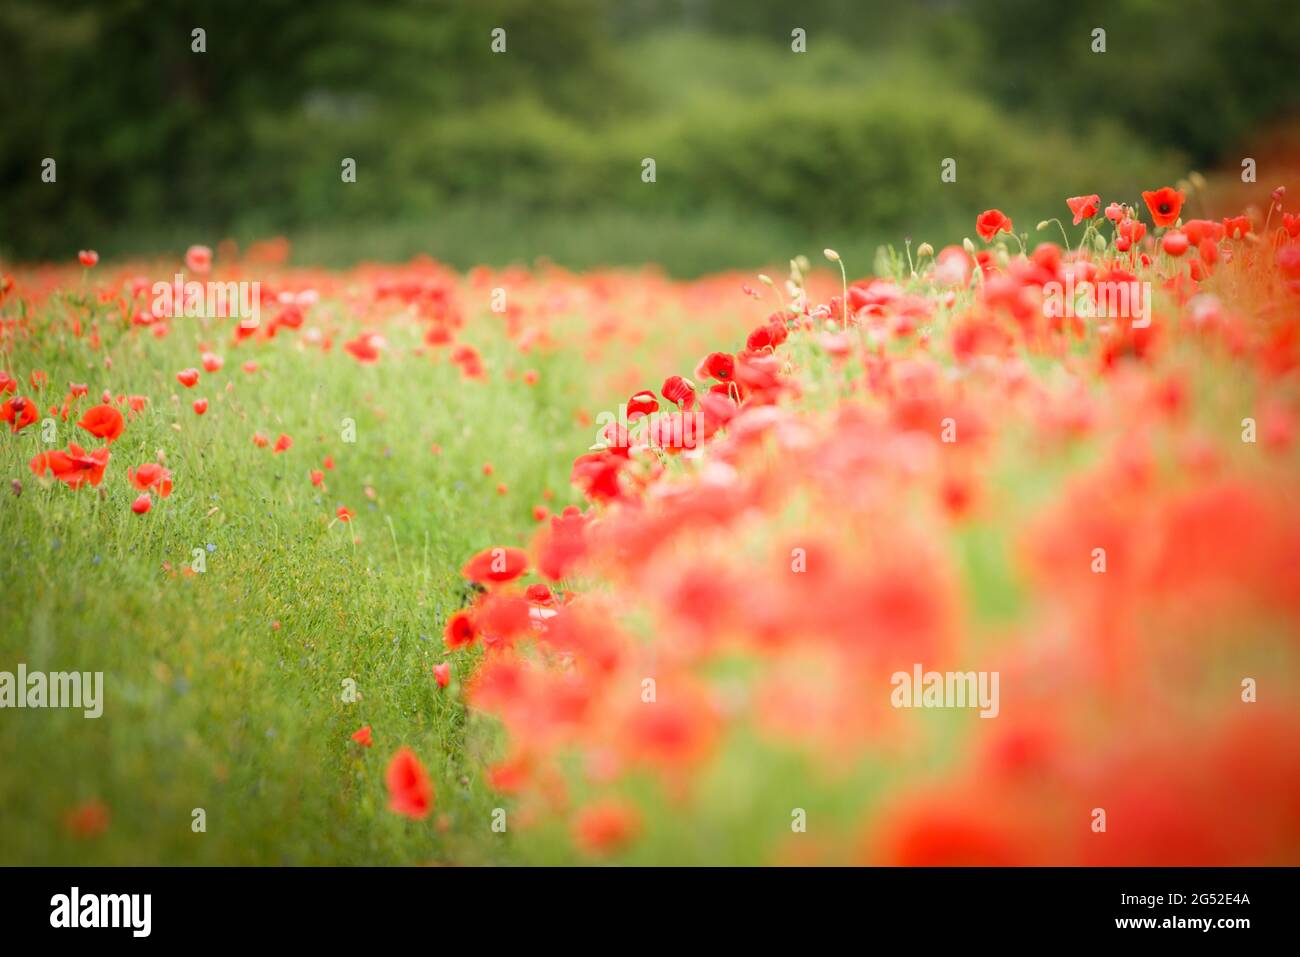 Wonderful field of poppies in Yorkshire Stock Photo